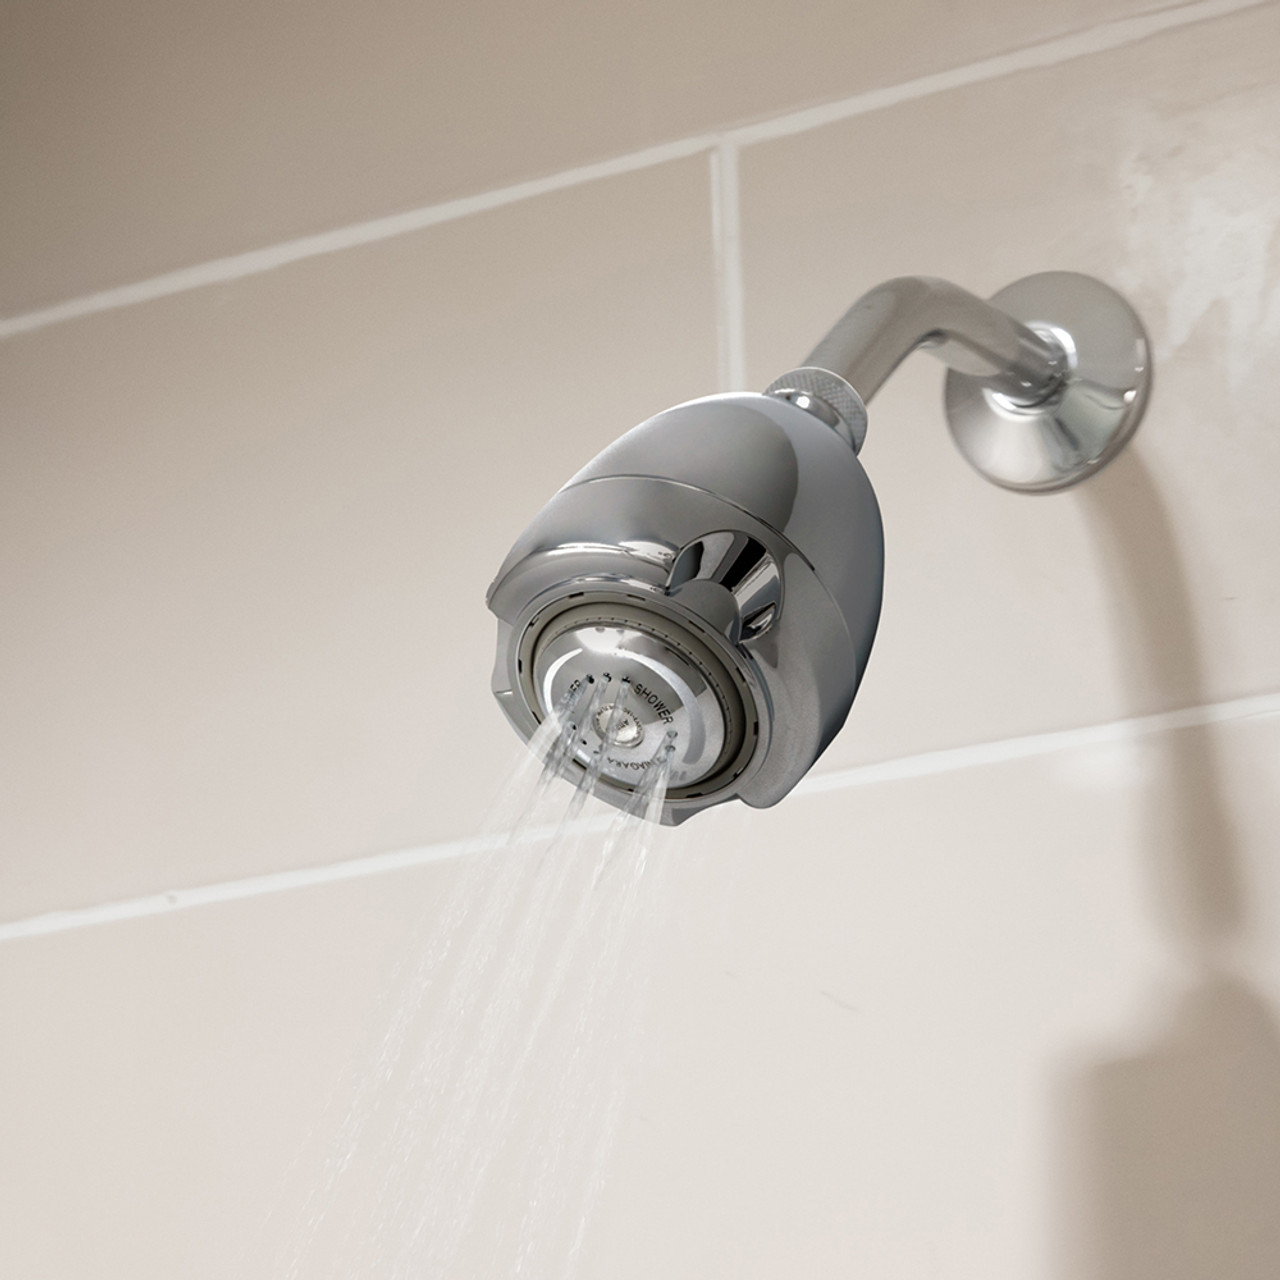 Earth Chrome Showerhead on wall with water spraying